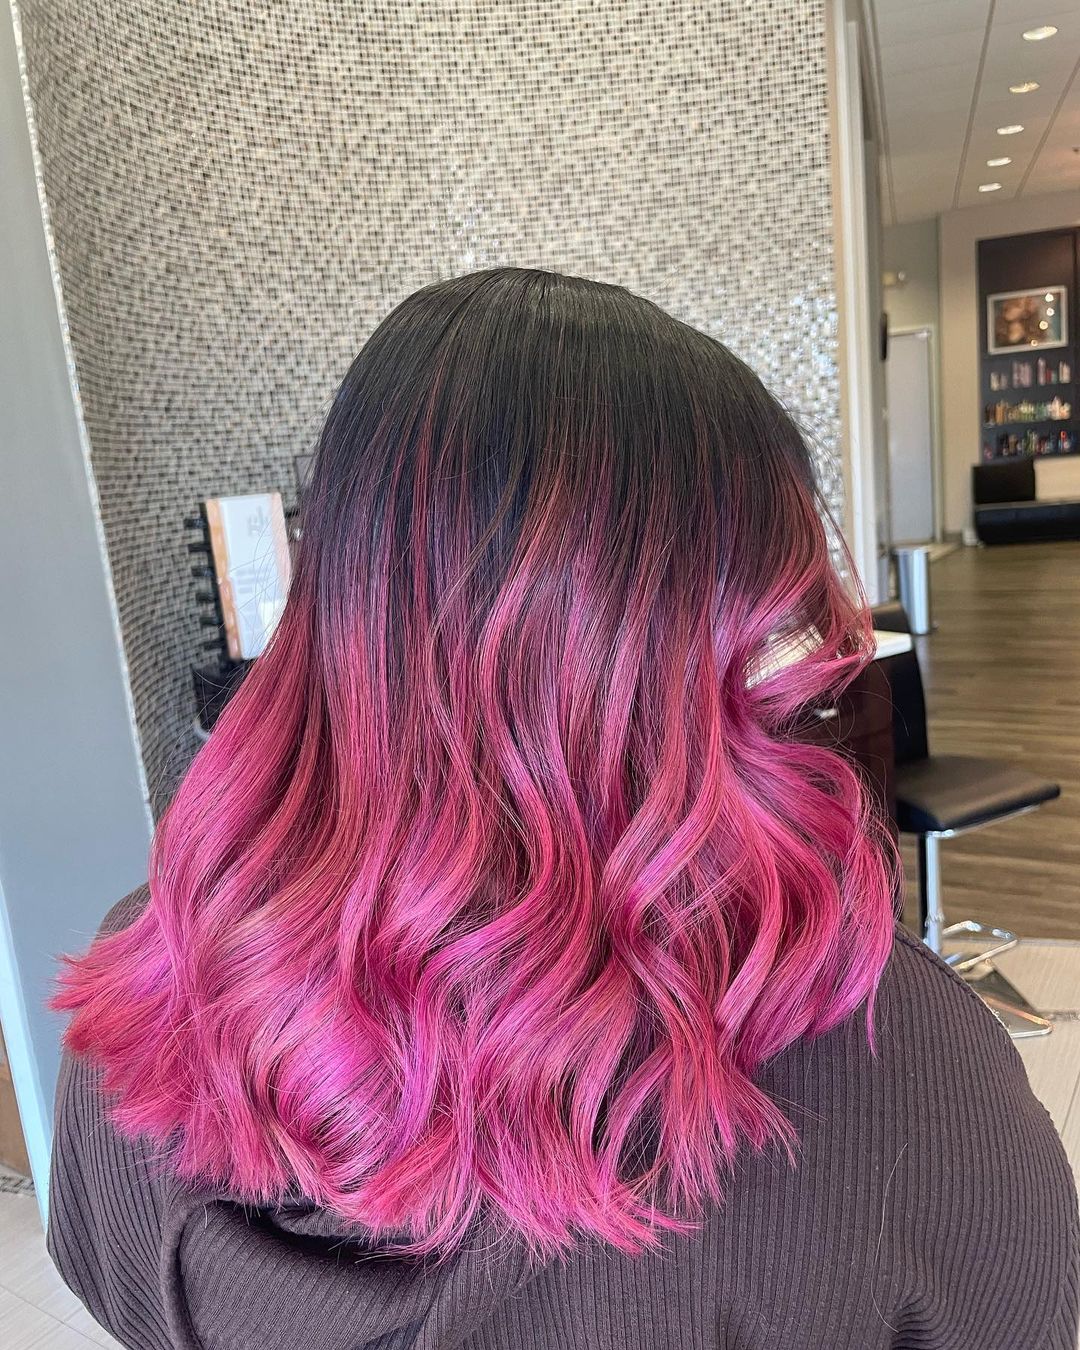 pink ombre hair color 153 Ombre pink hair blonde | Pastel pink ombre hair | Pink balayage Hair Pink Ombre Hair Color for Women